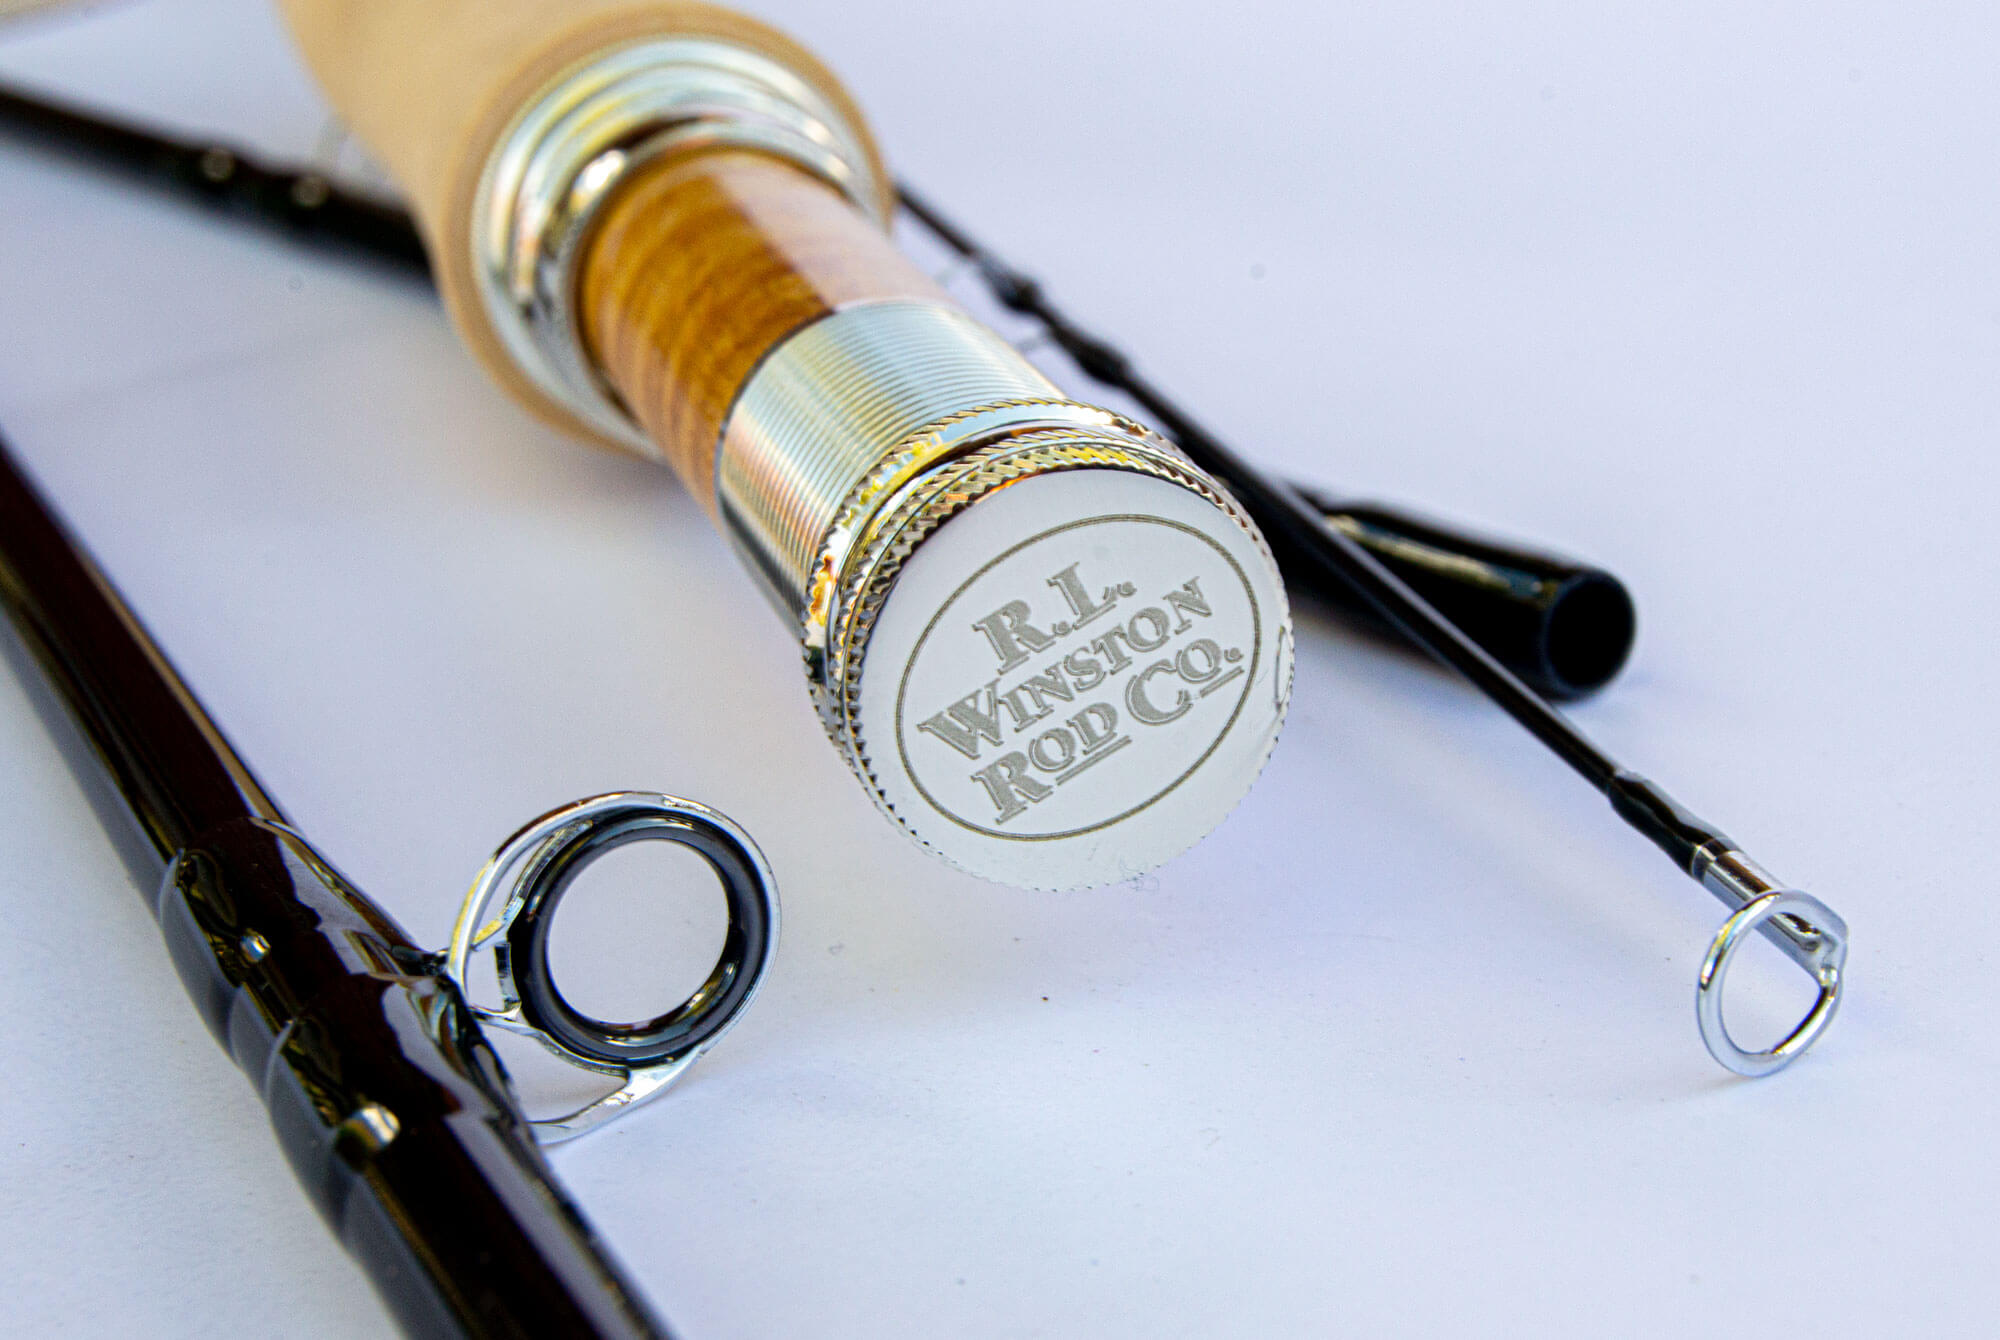 Winston Pure 9' 5-weight fly rod